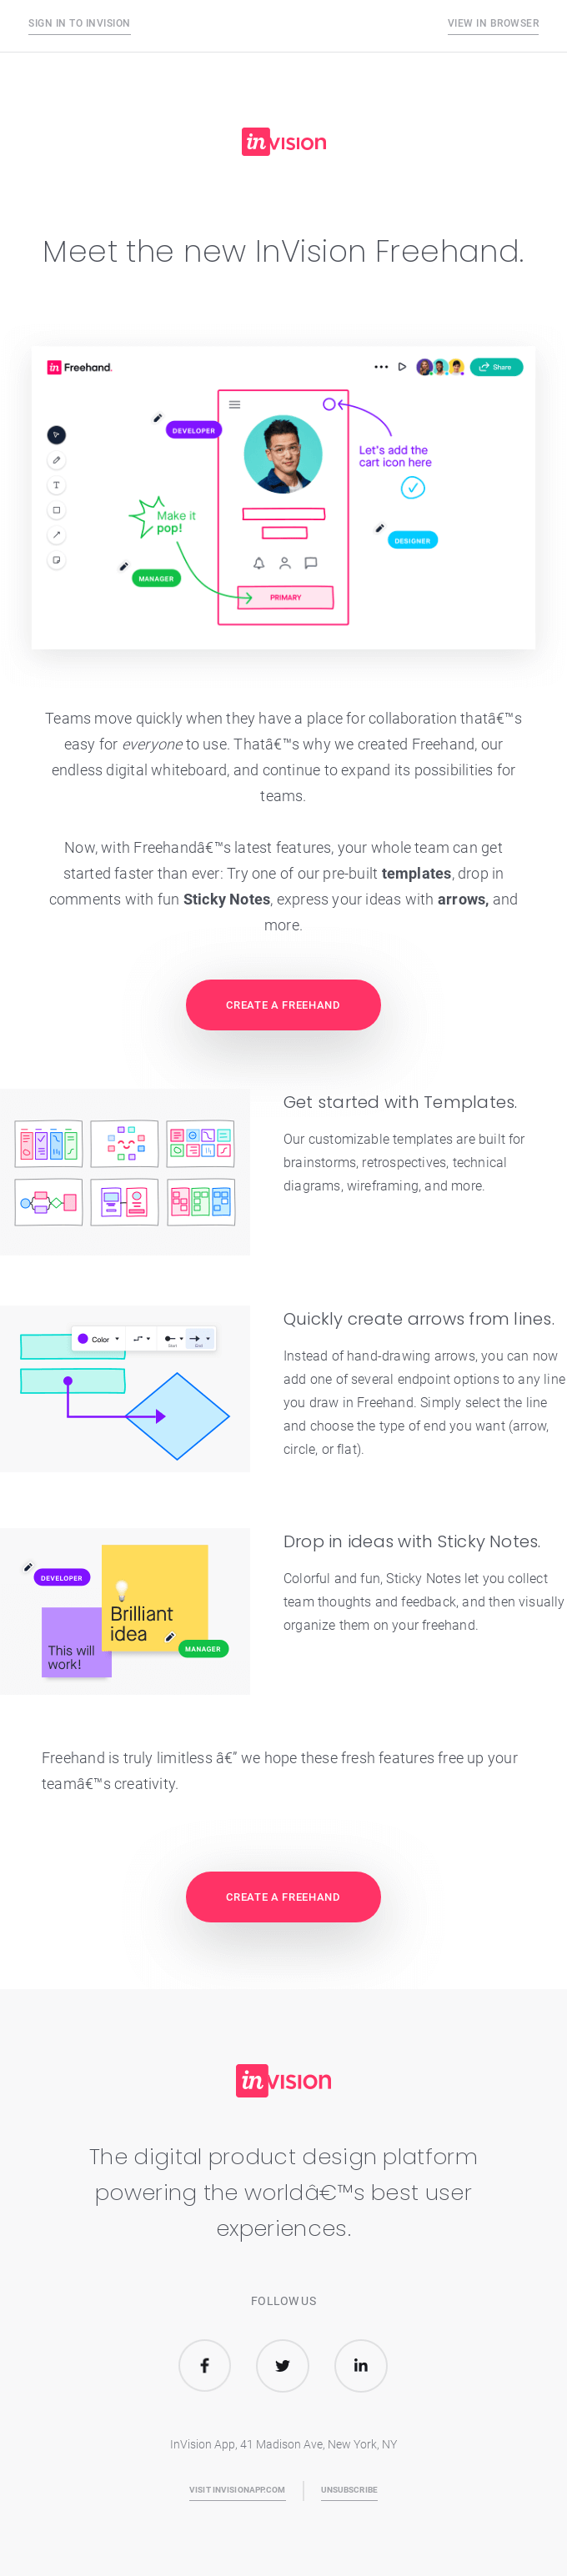 New: Freehand is now better than ever - Invision Email Newsletter